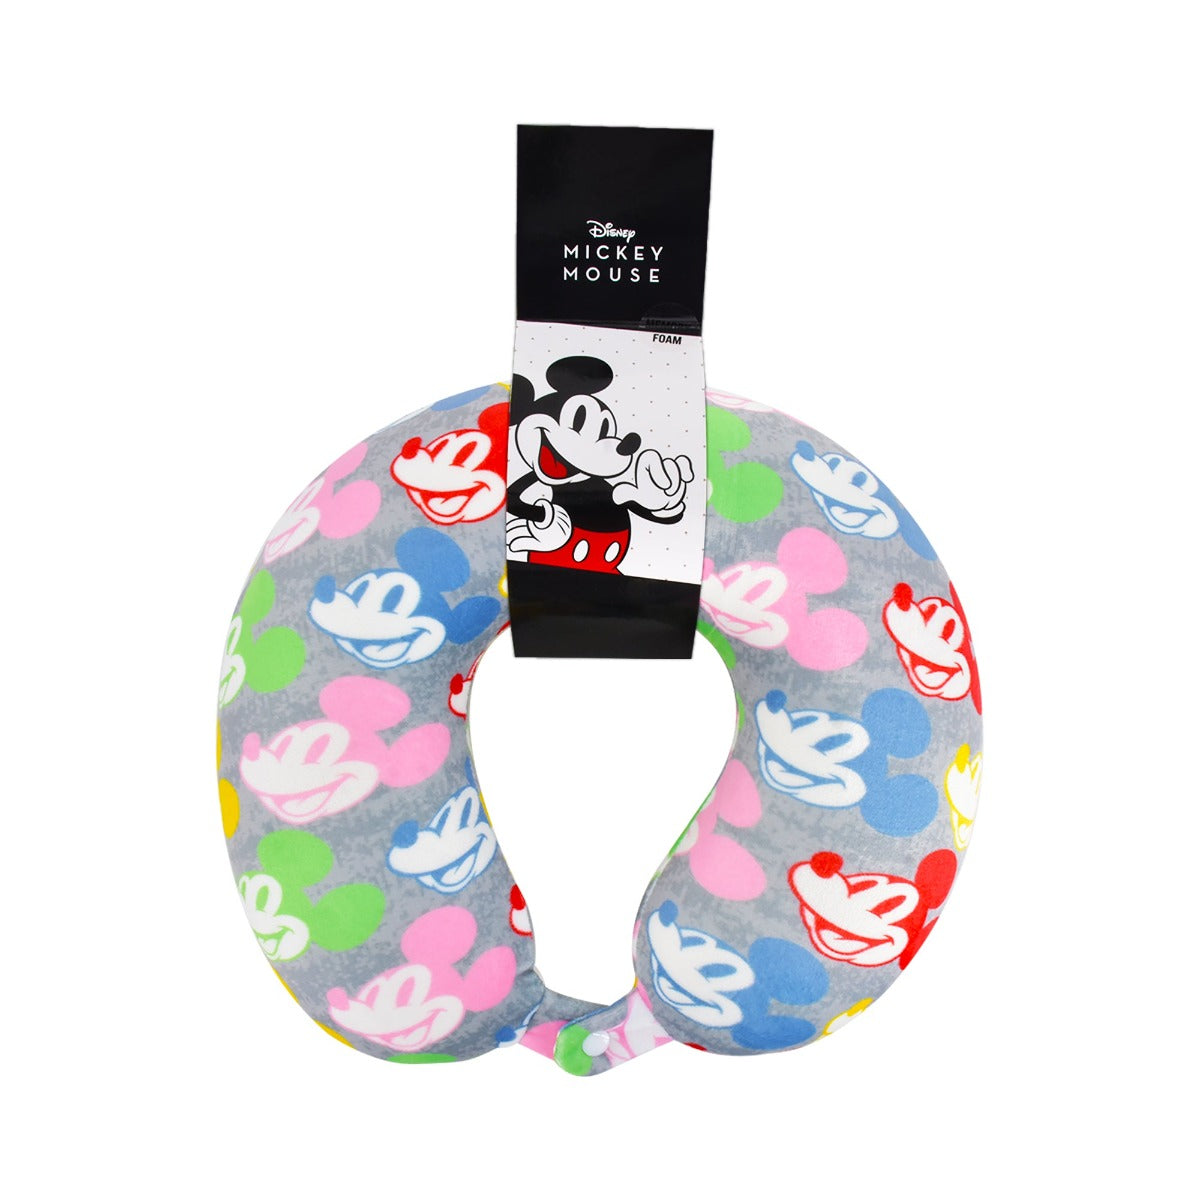 Disney Mickey Mouse with memory foam best travel neck pillow for traveling